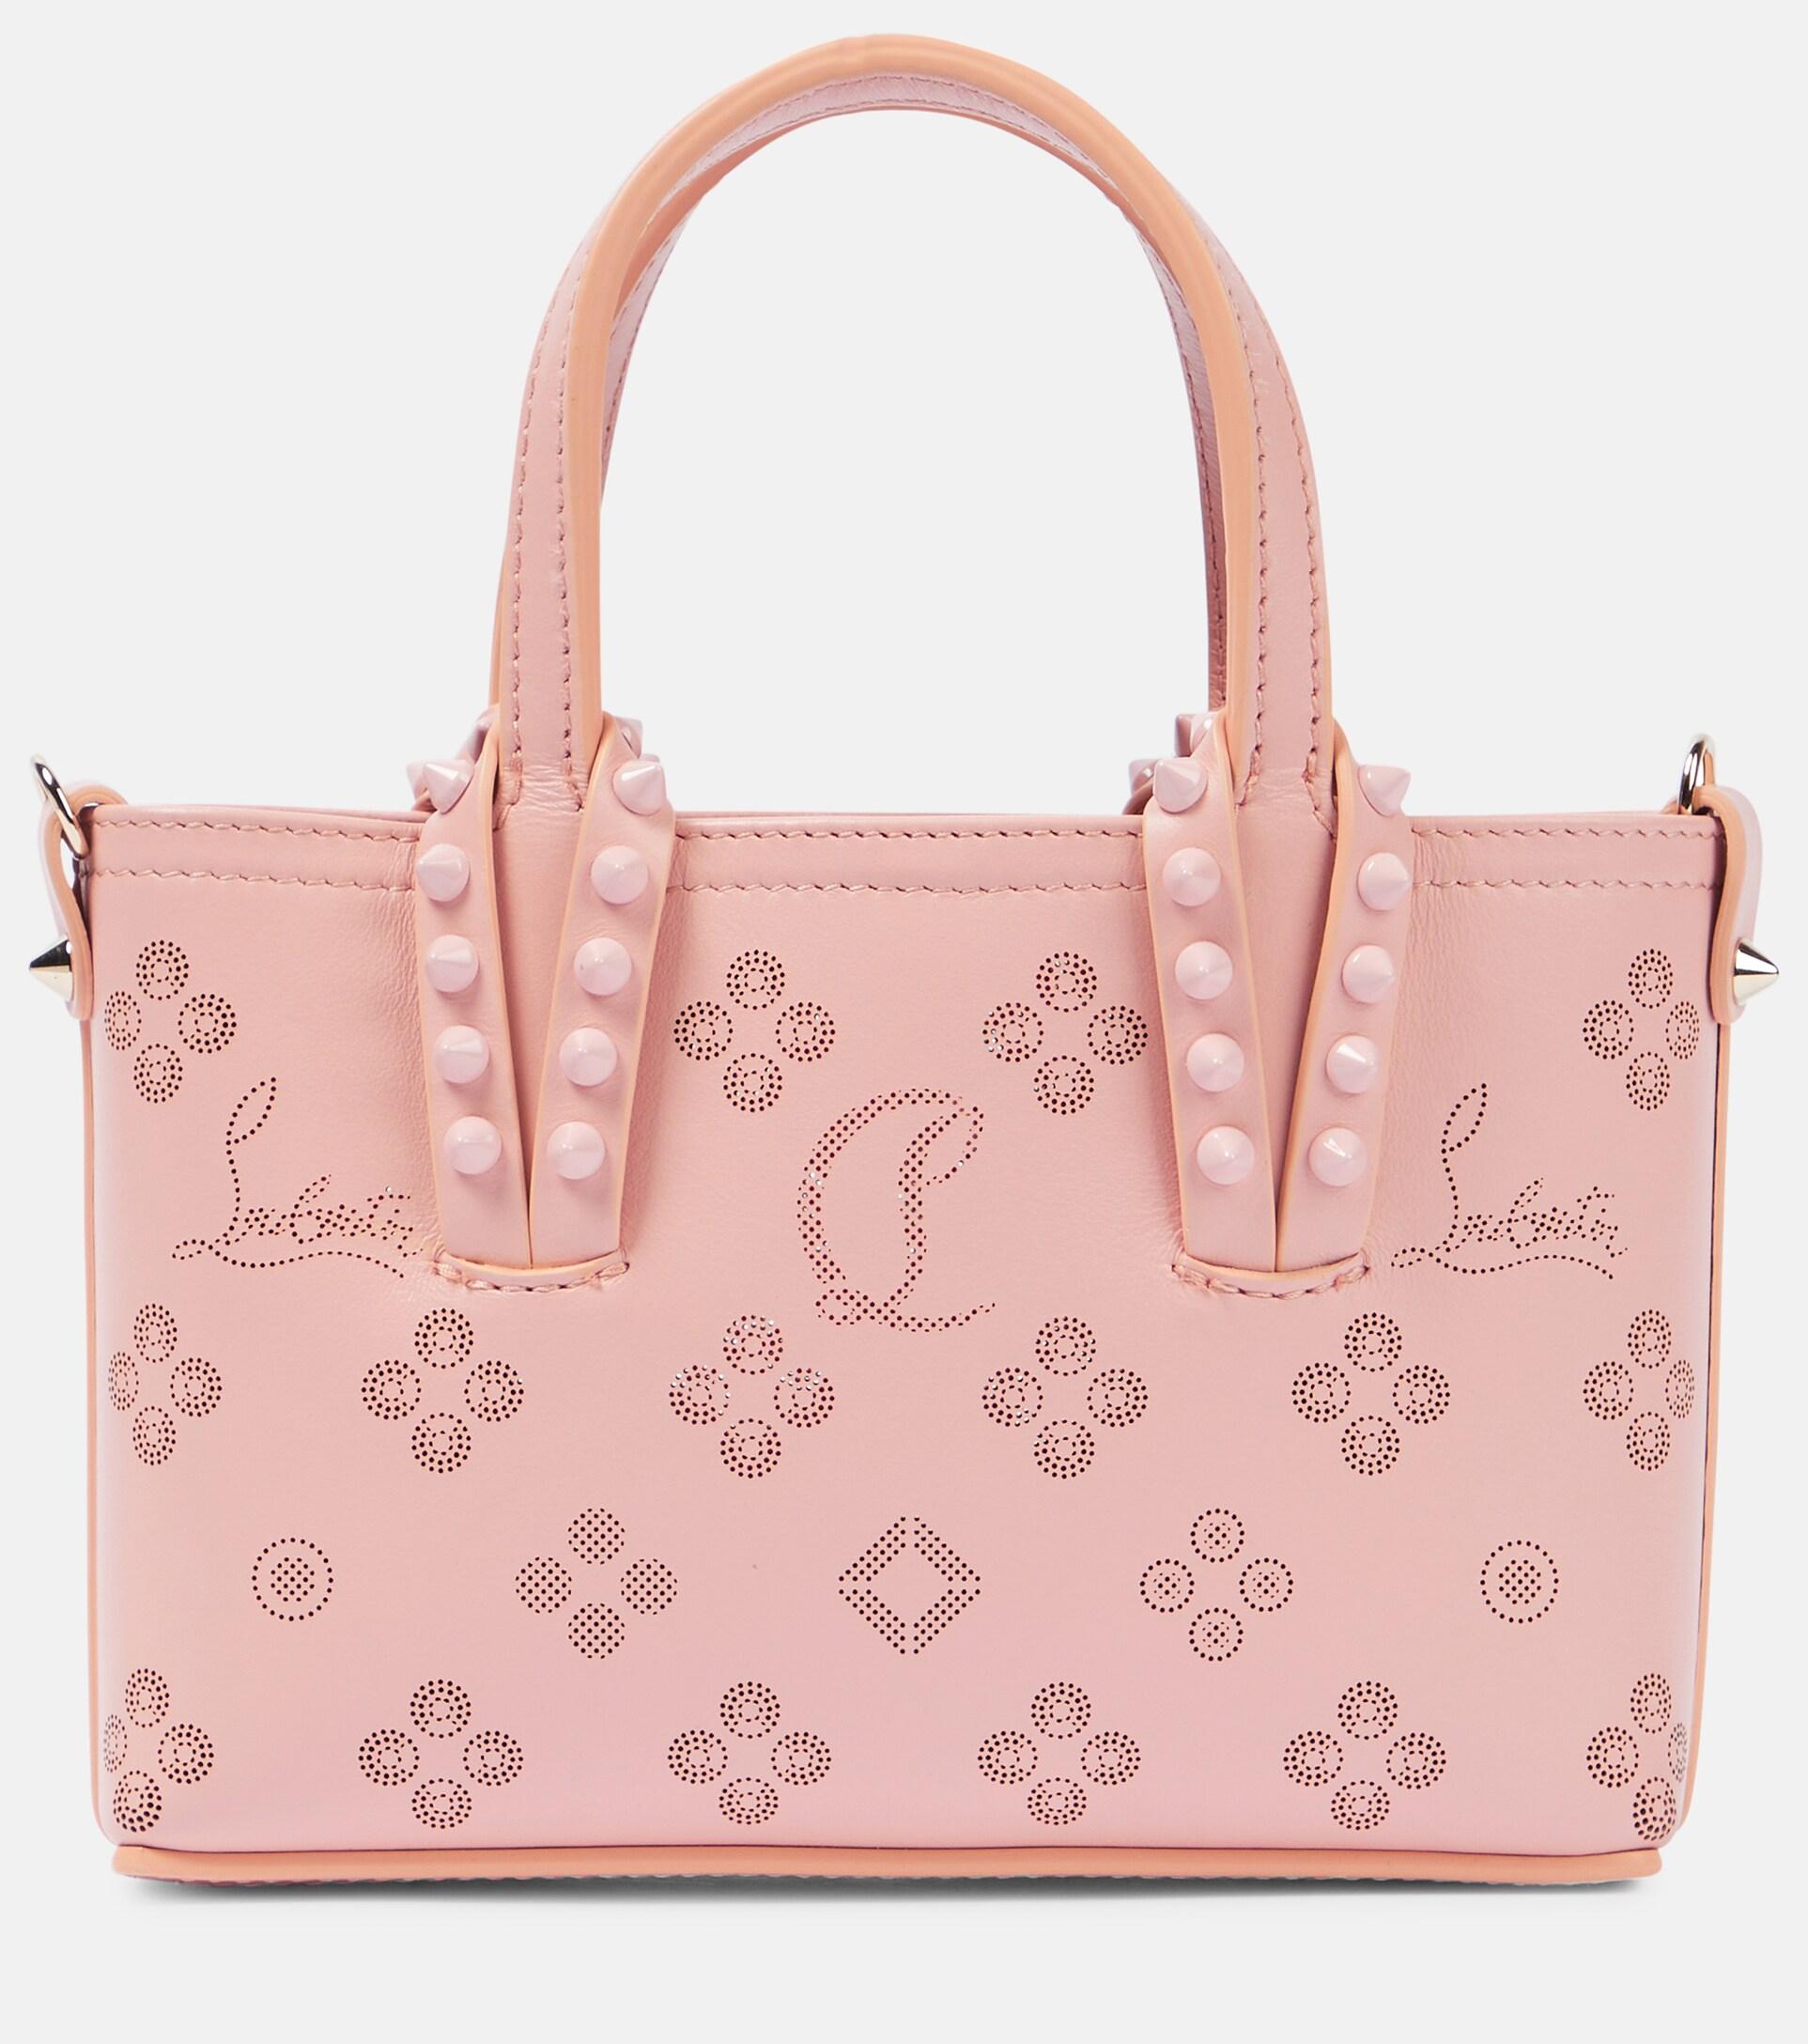 Christian Louboutin Loubishore Floral-Embroidered Tote Bag - Pink Totes,  Handbags - CHT299796